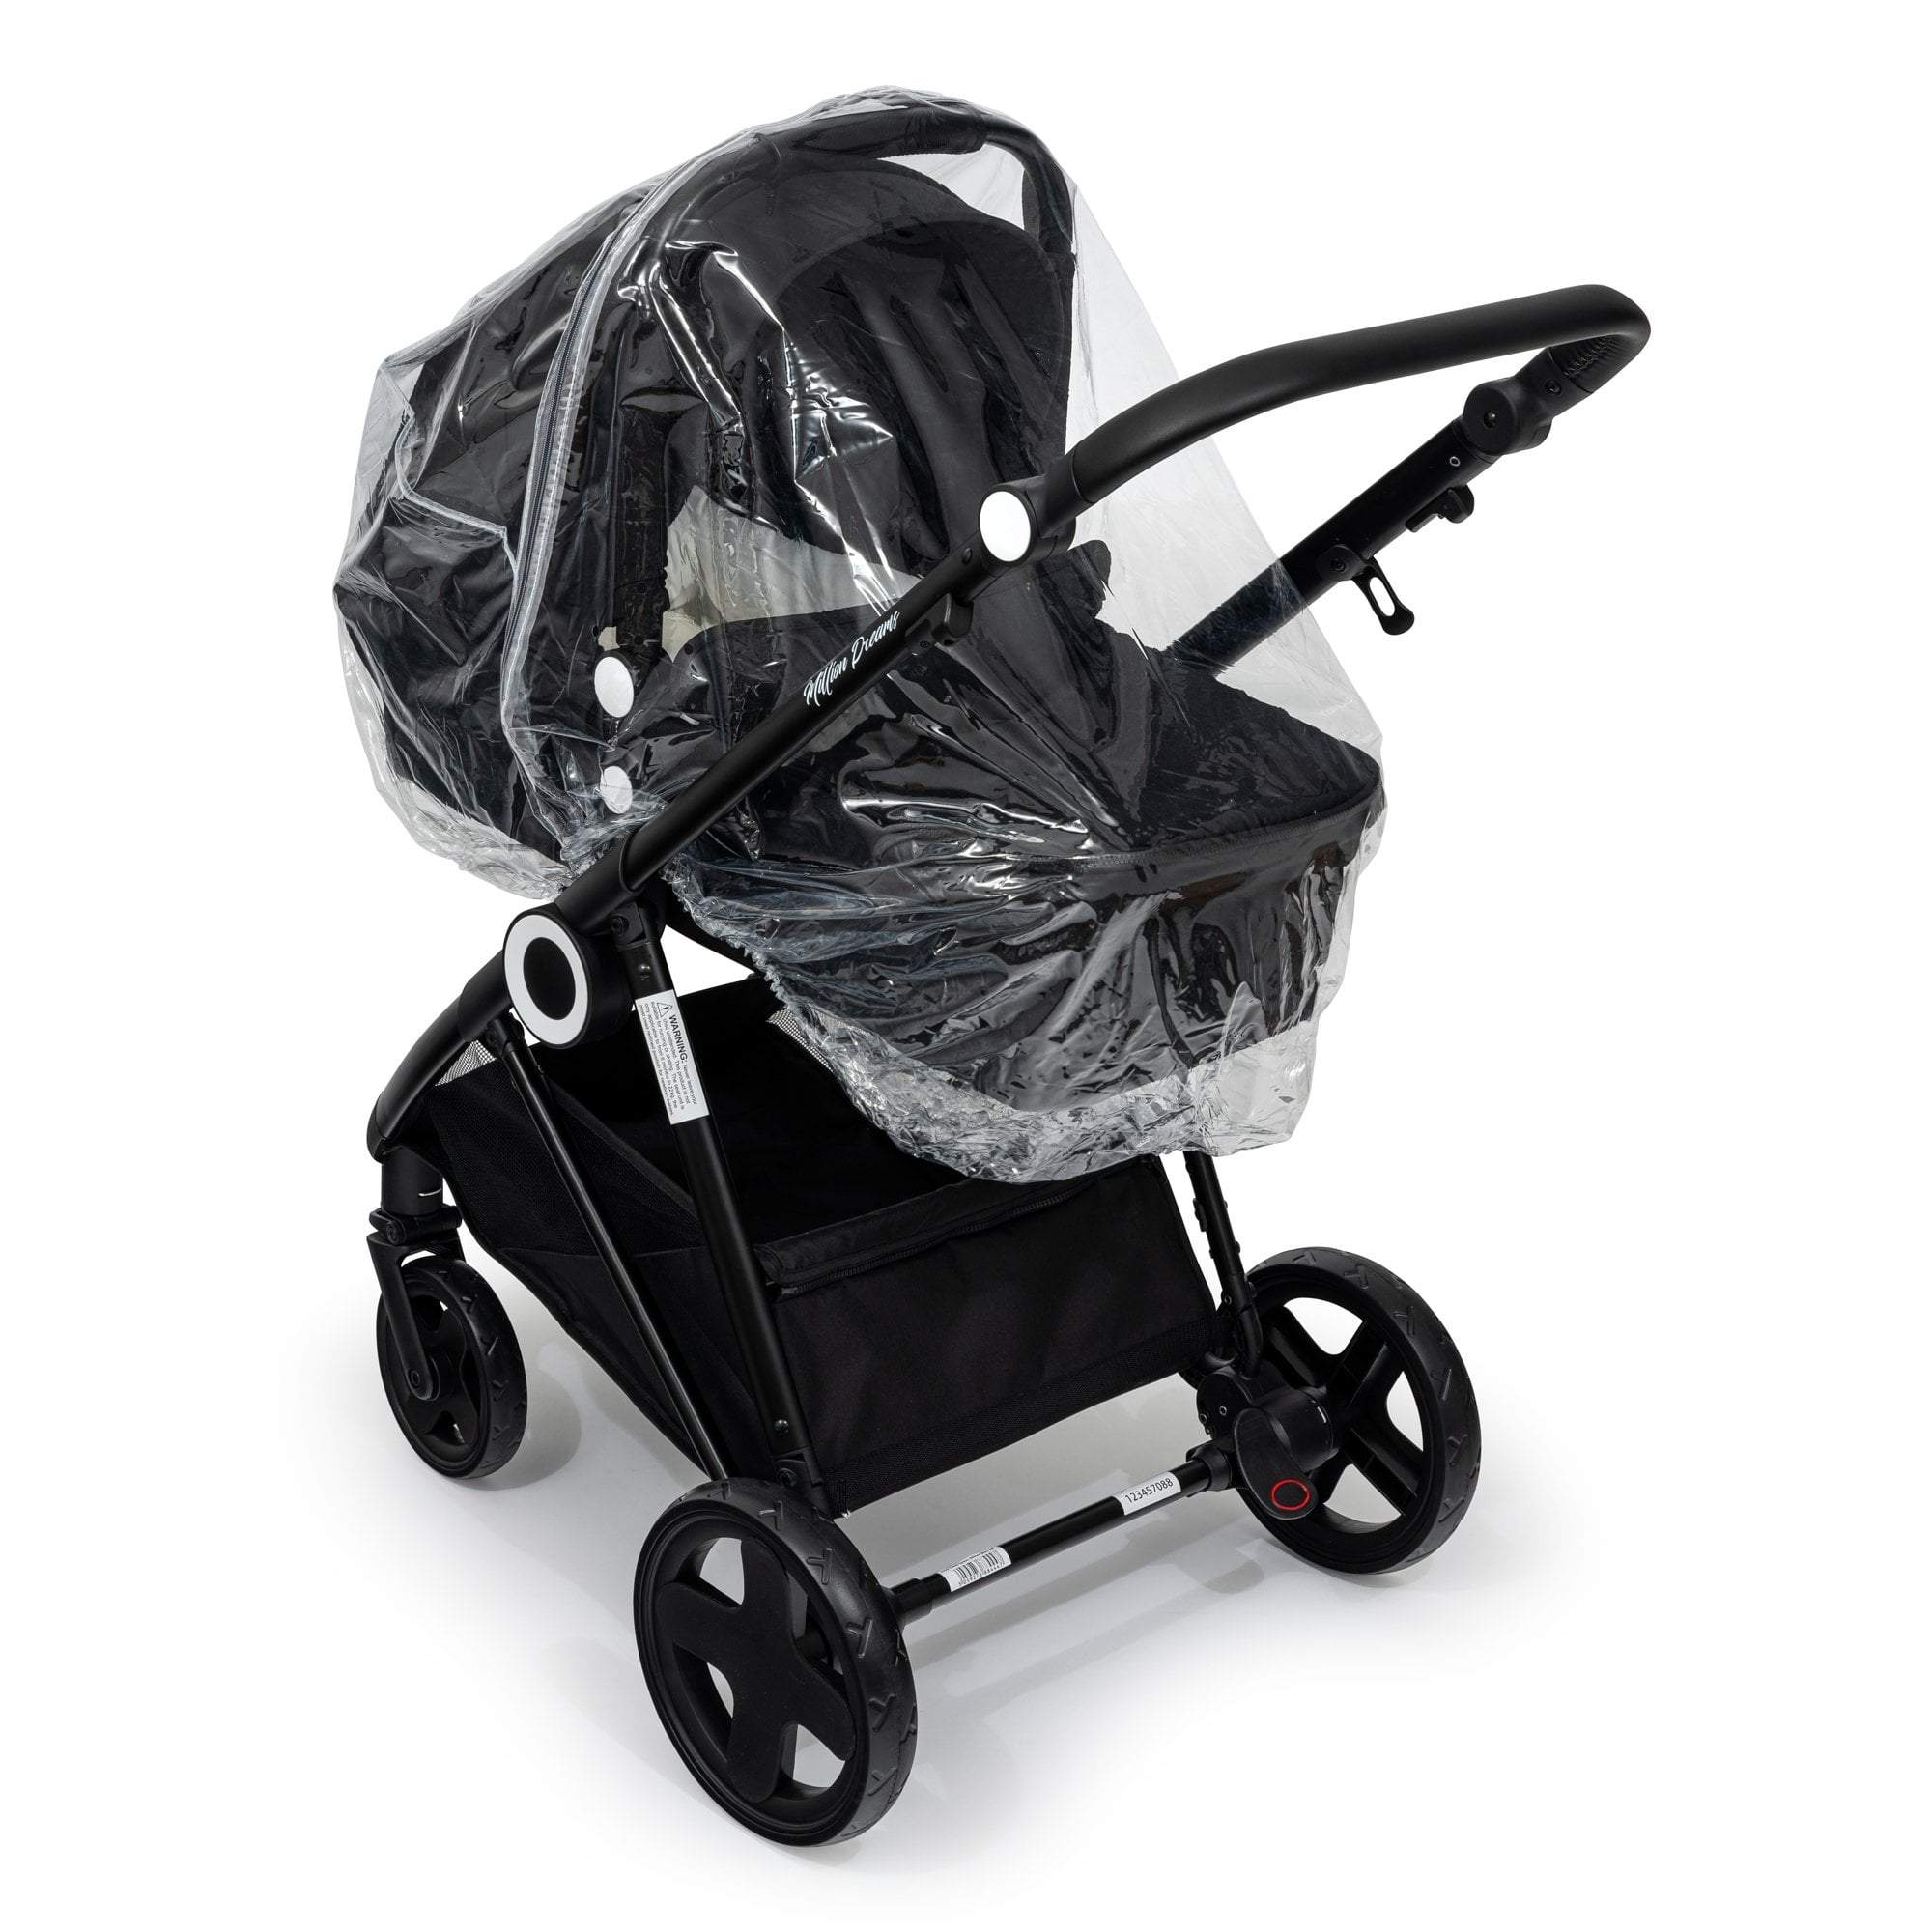 Carrycot Raincover Compatible With Hauck - Fits All Models - For Your Little One